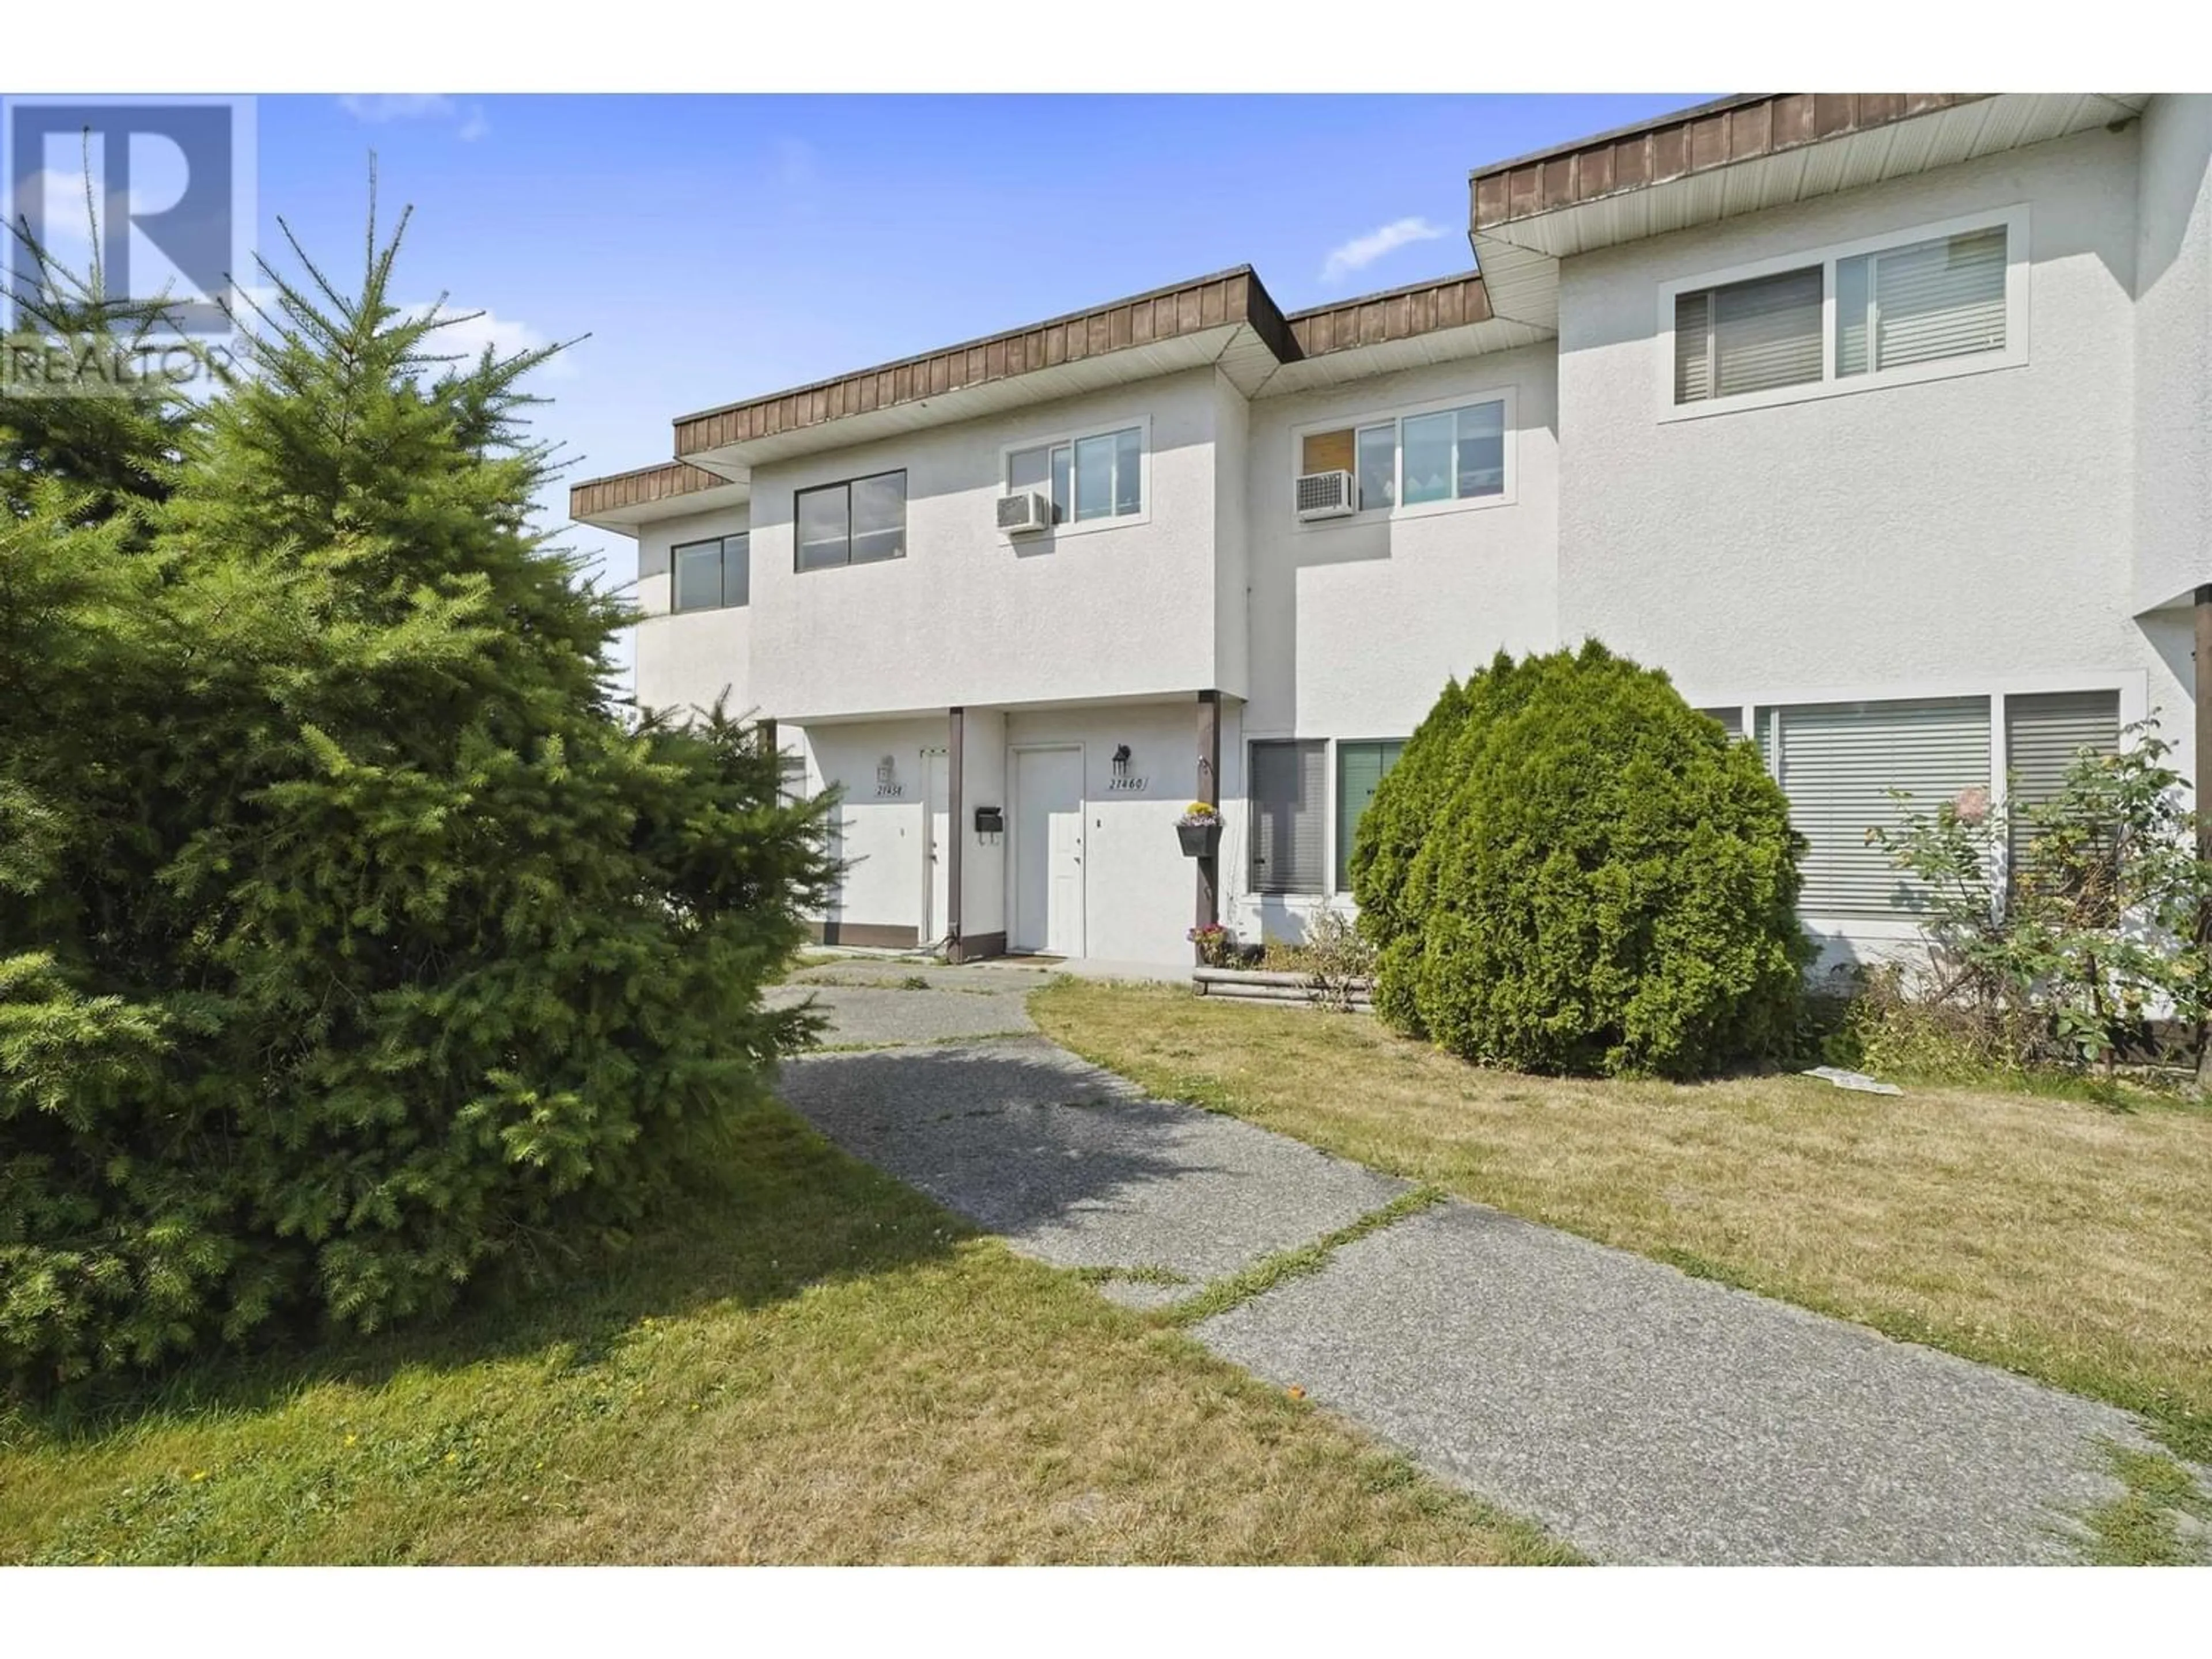 A pic from exterior of the house or condo for 21460 MAYO PLACE, Maple Ridge British Columbia V2X2K9